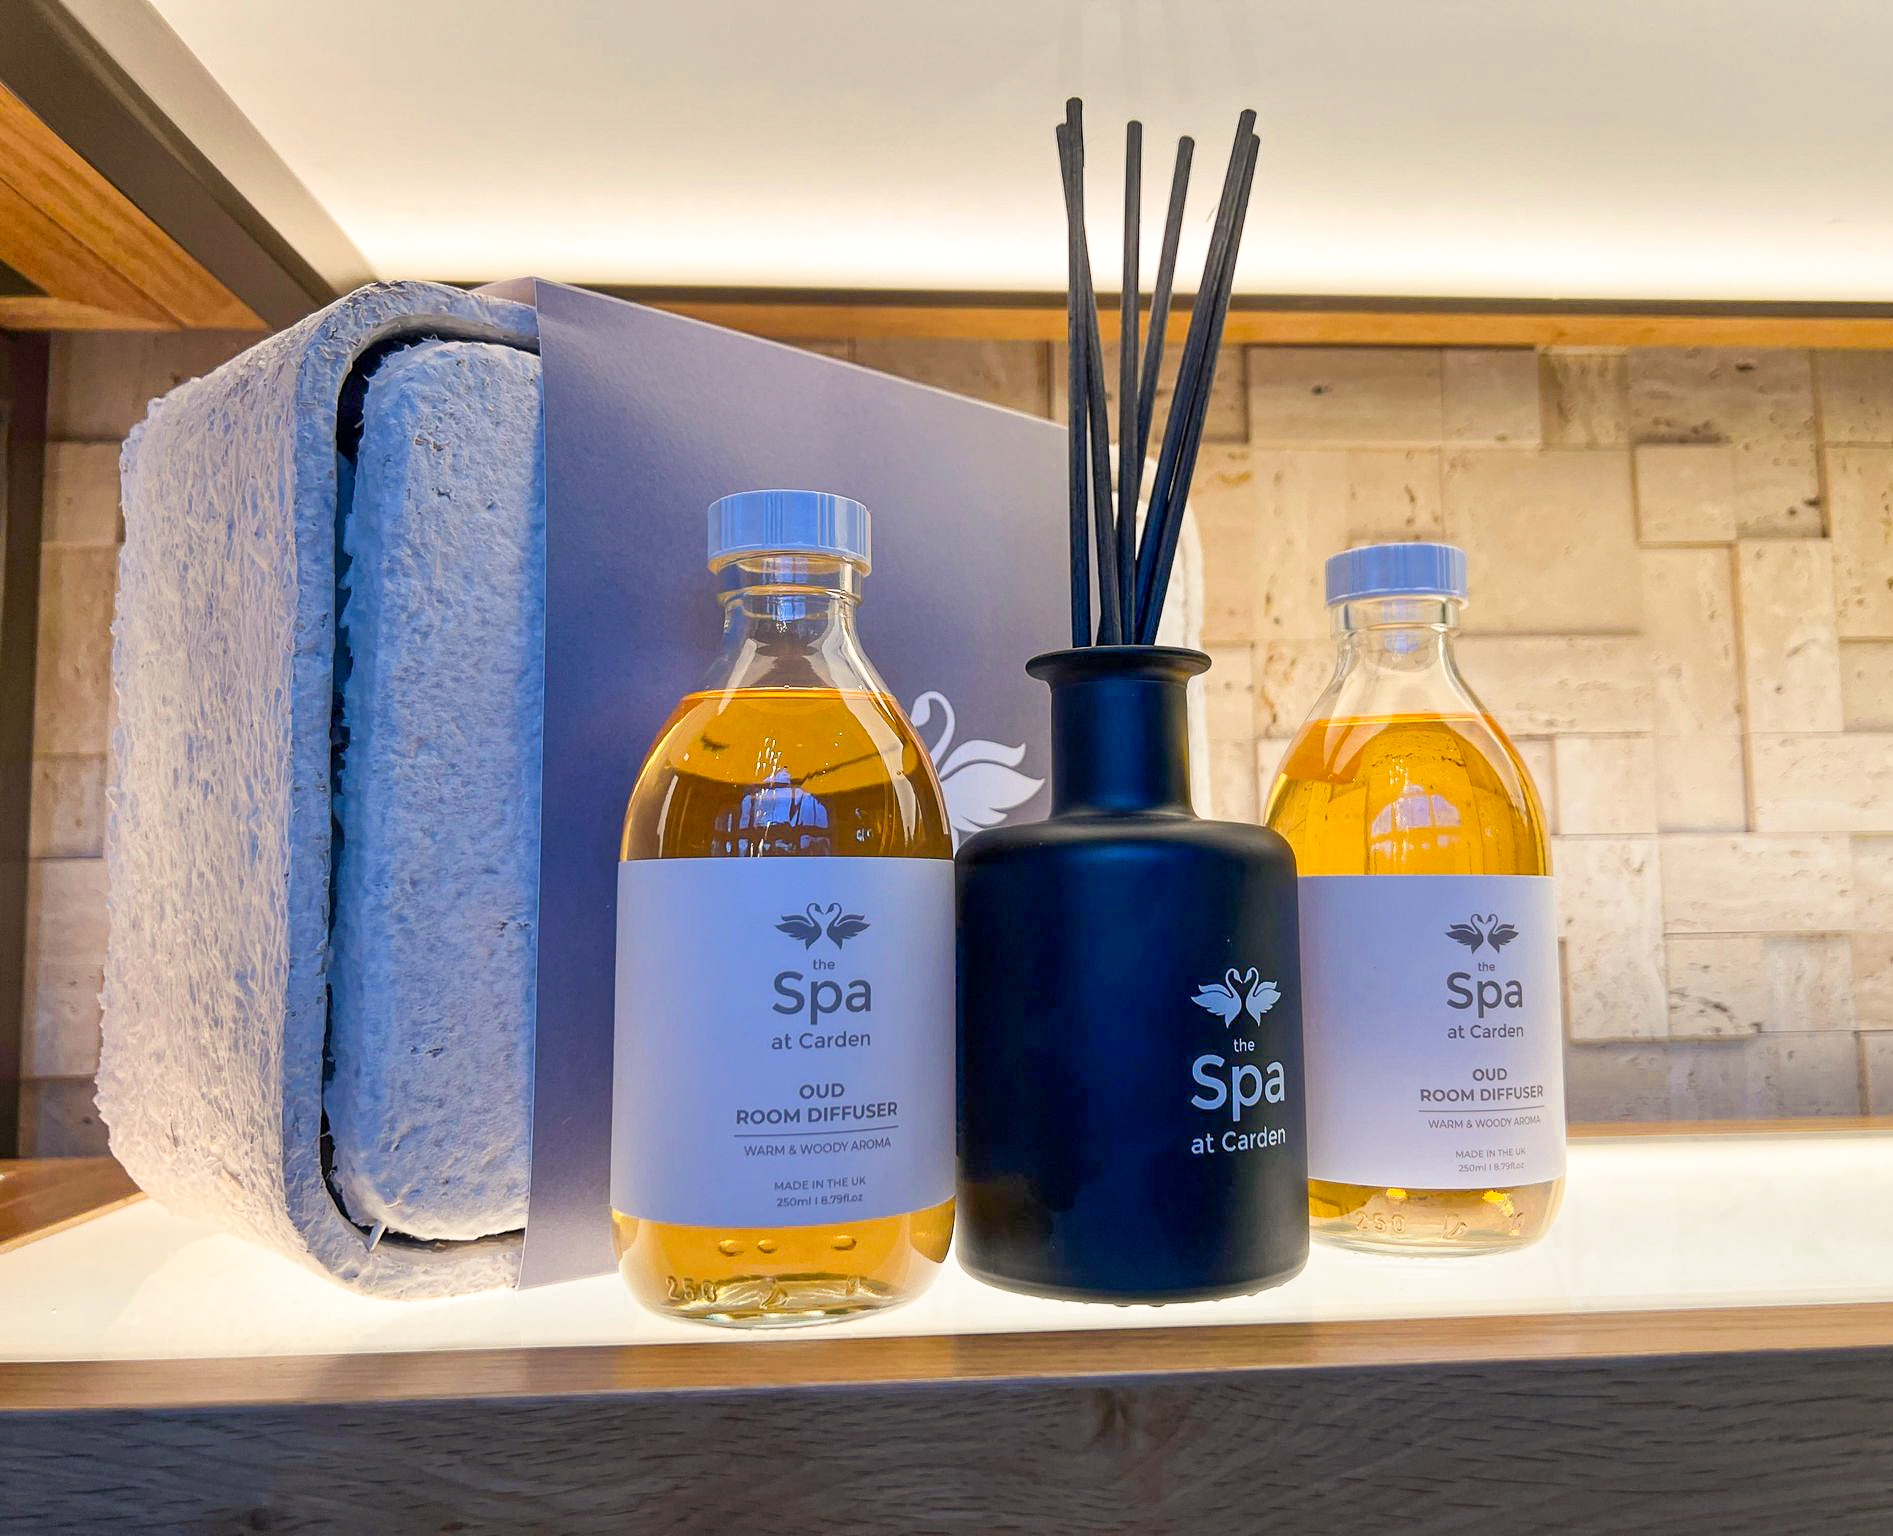 Oud room diffuser at Carden Park